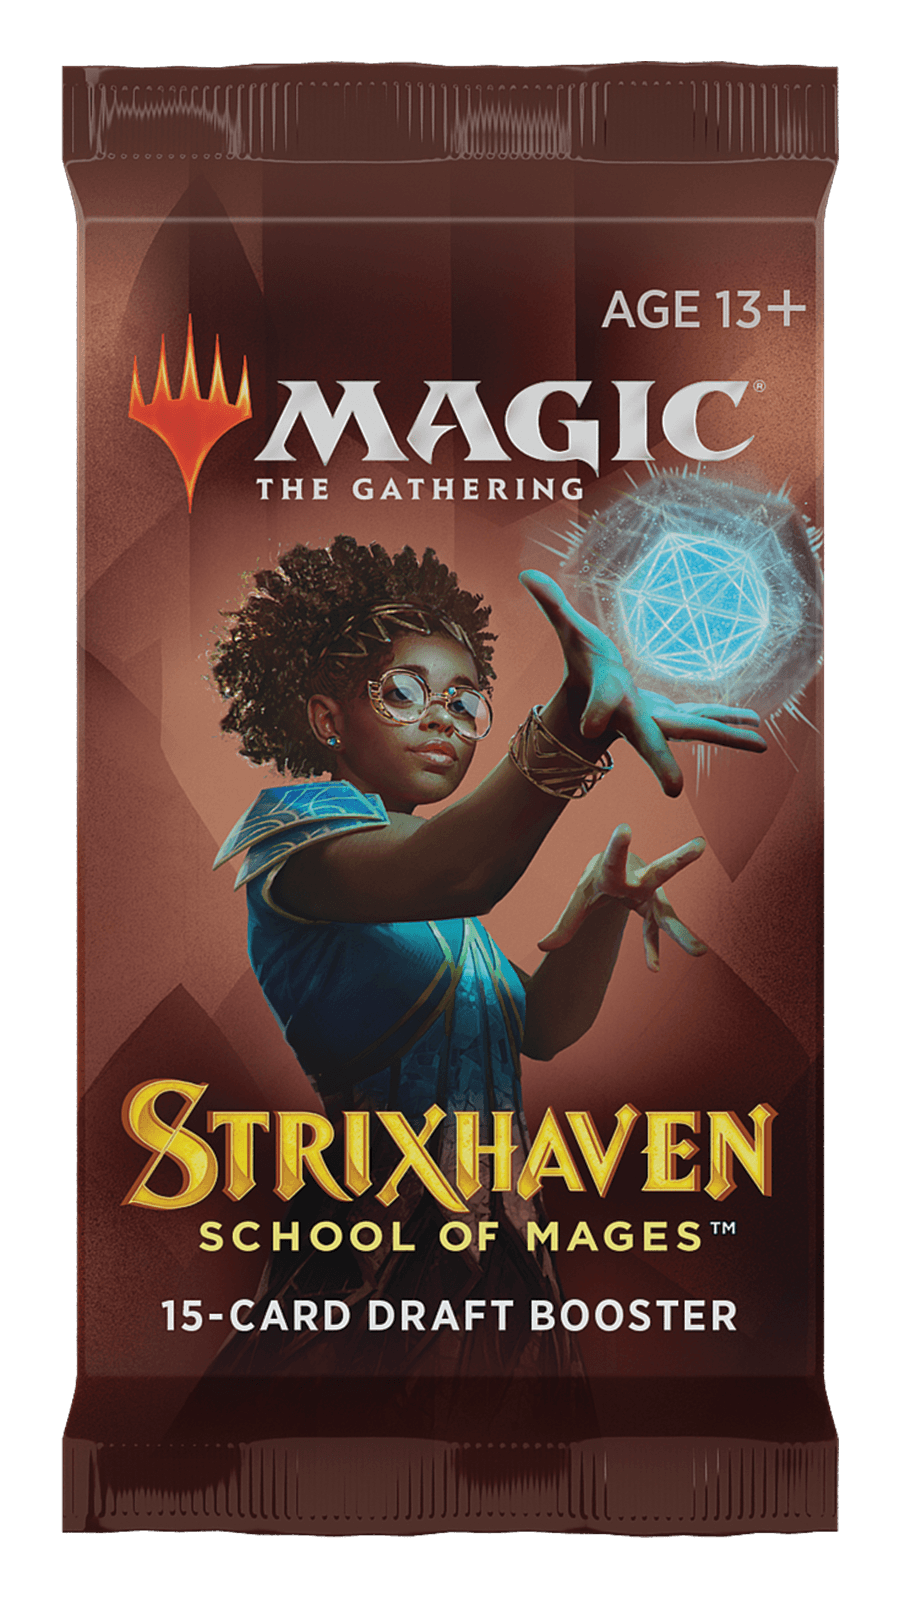 Magic The Gathering Strixhaven Draft Booster CCG Wizards of the Coast 